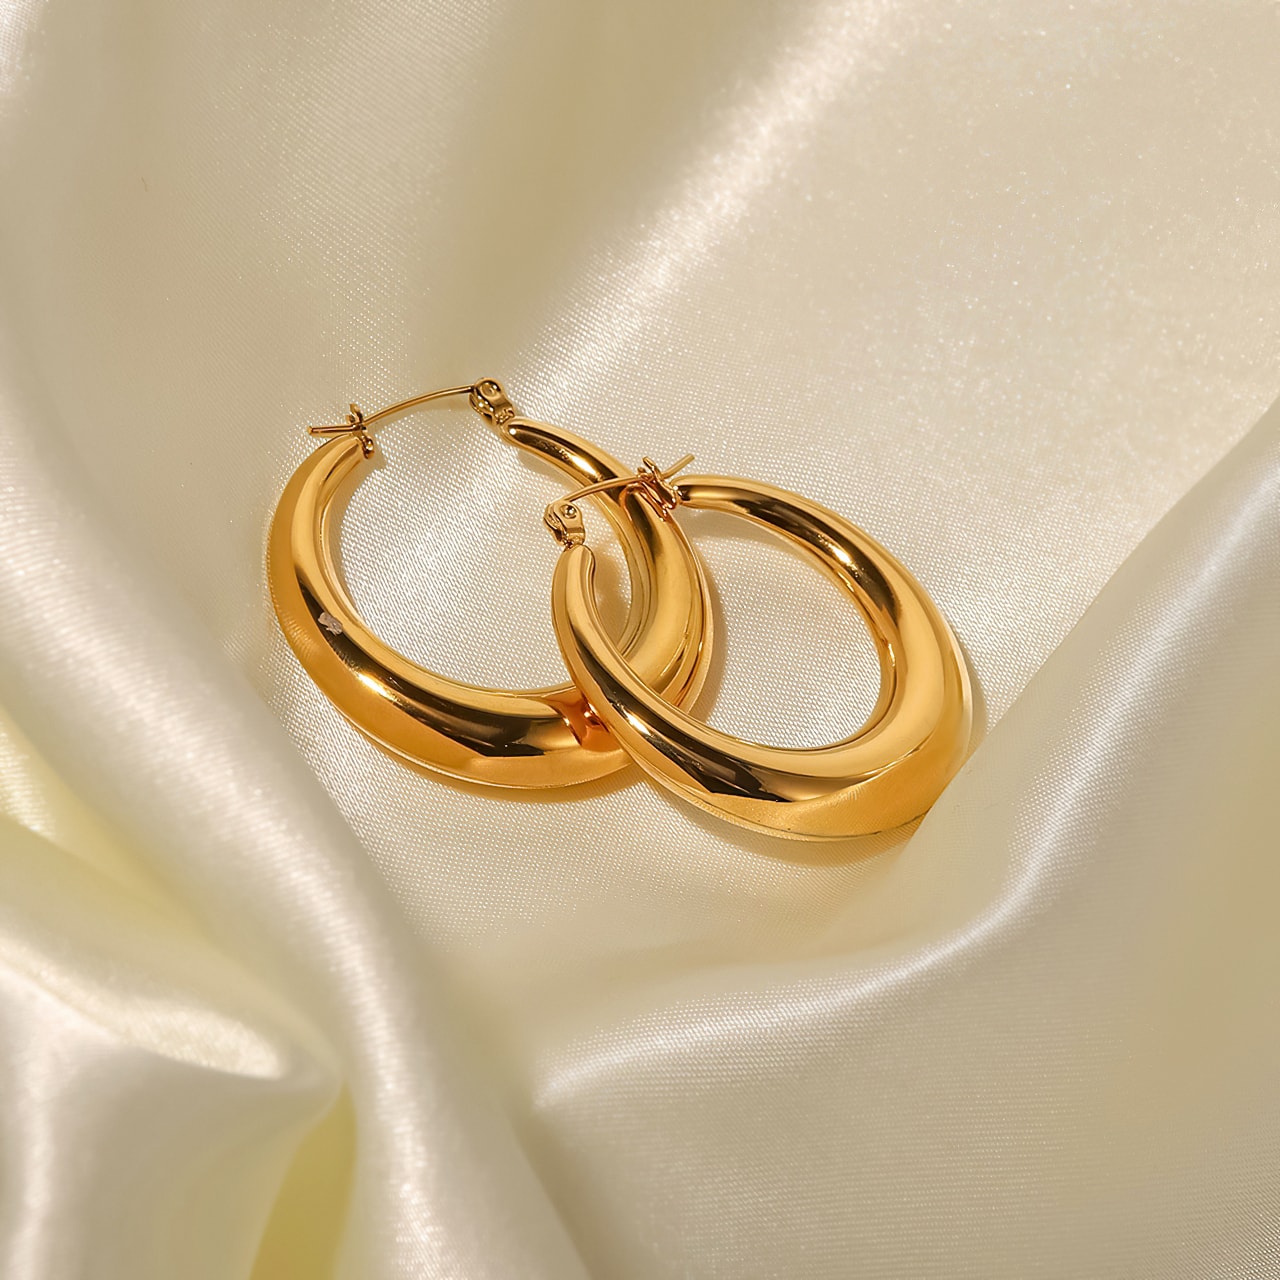 Minimalist Circular INS Style 18k Gold-Plated Earrings - MONICA